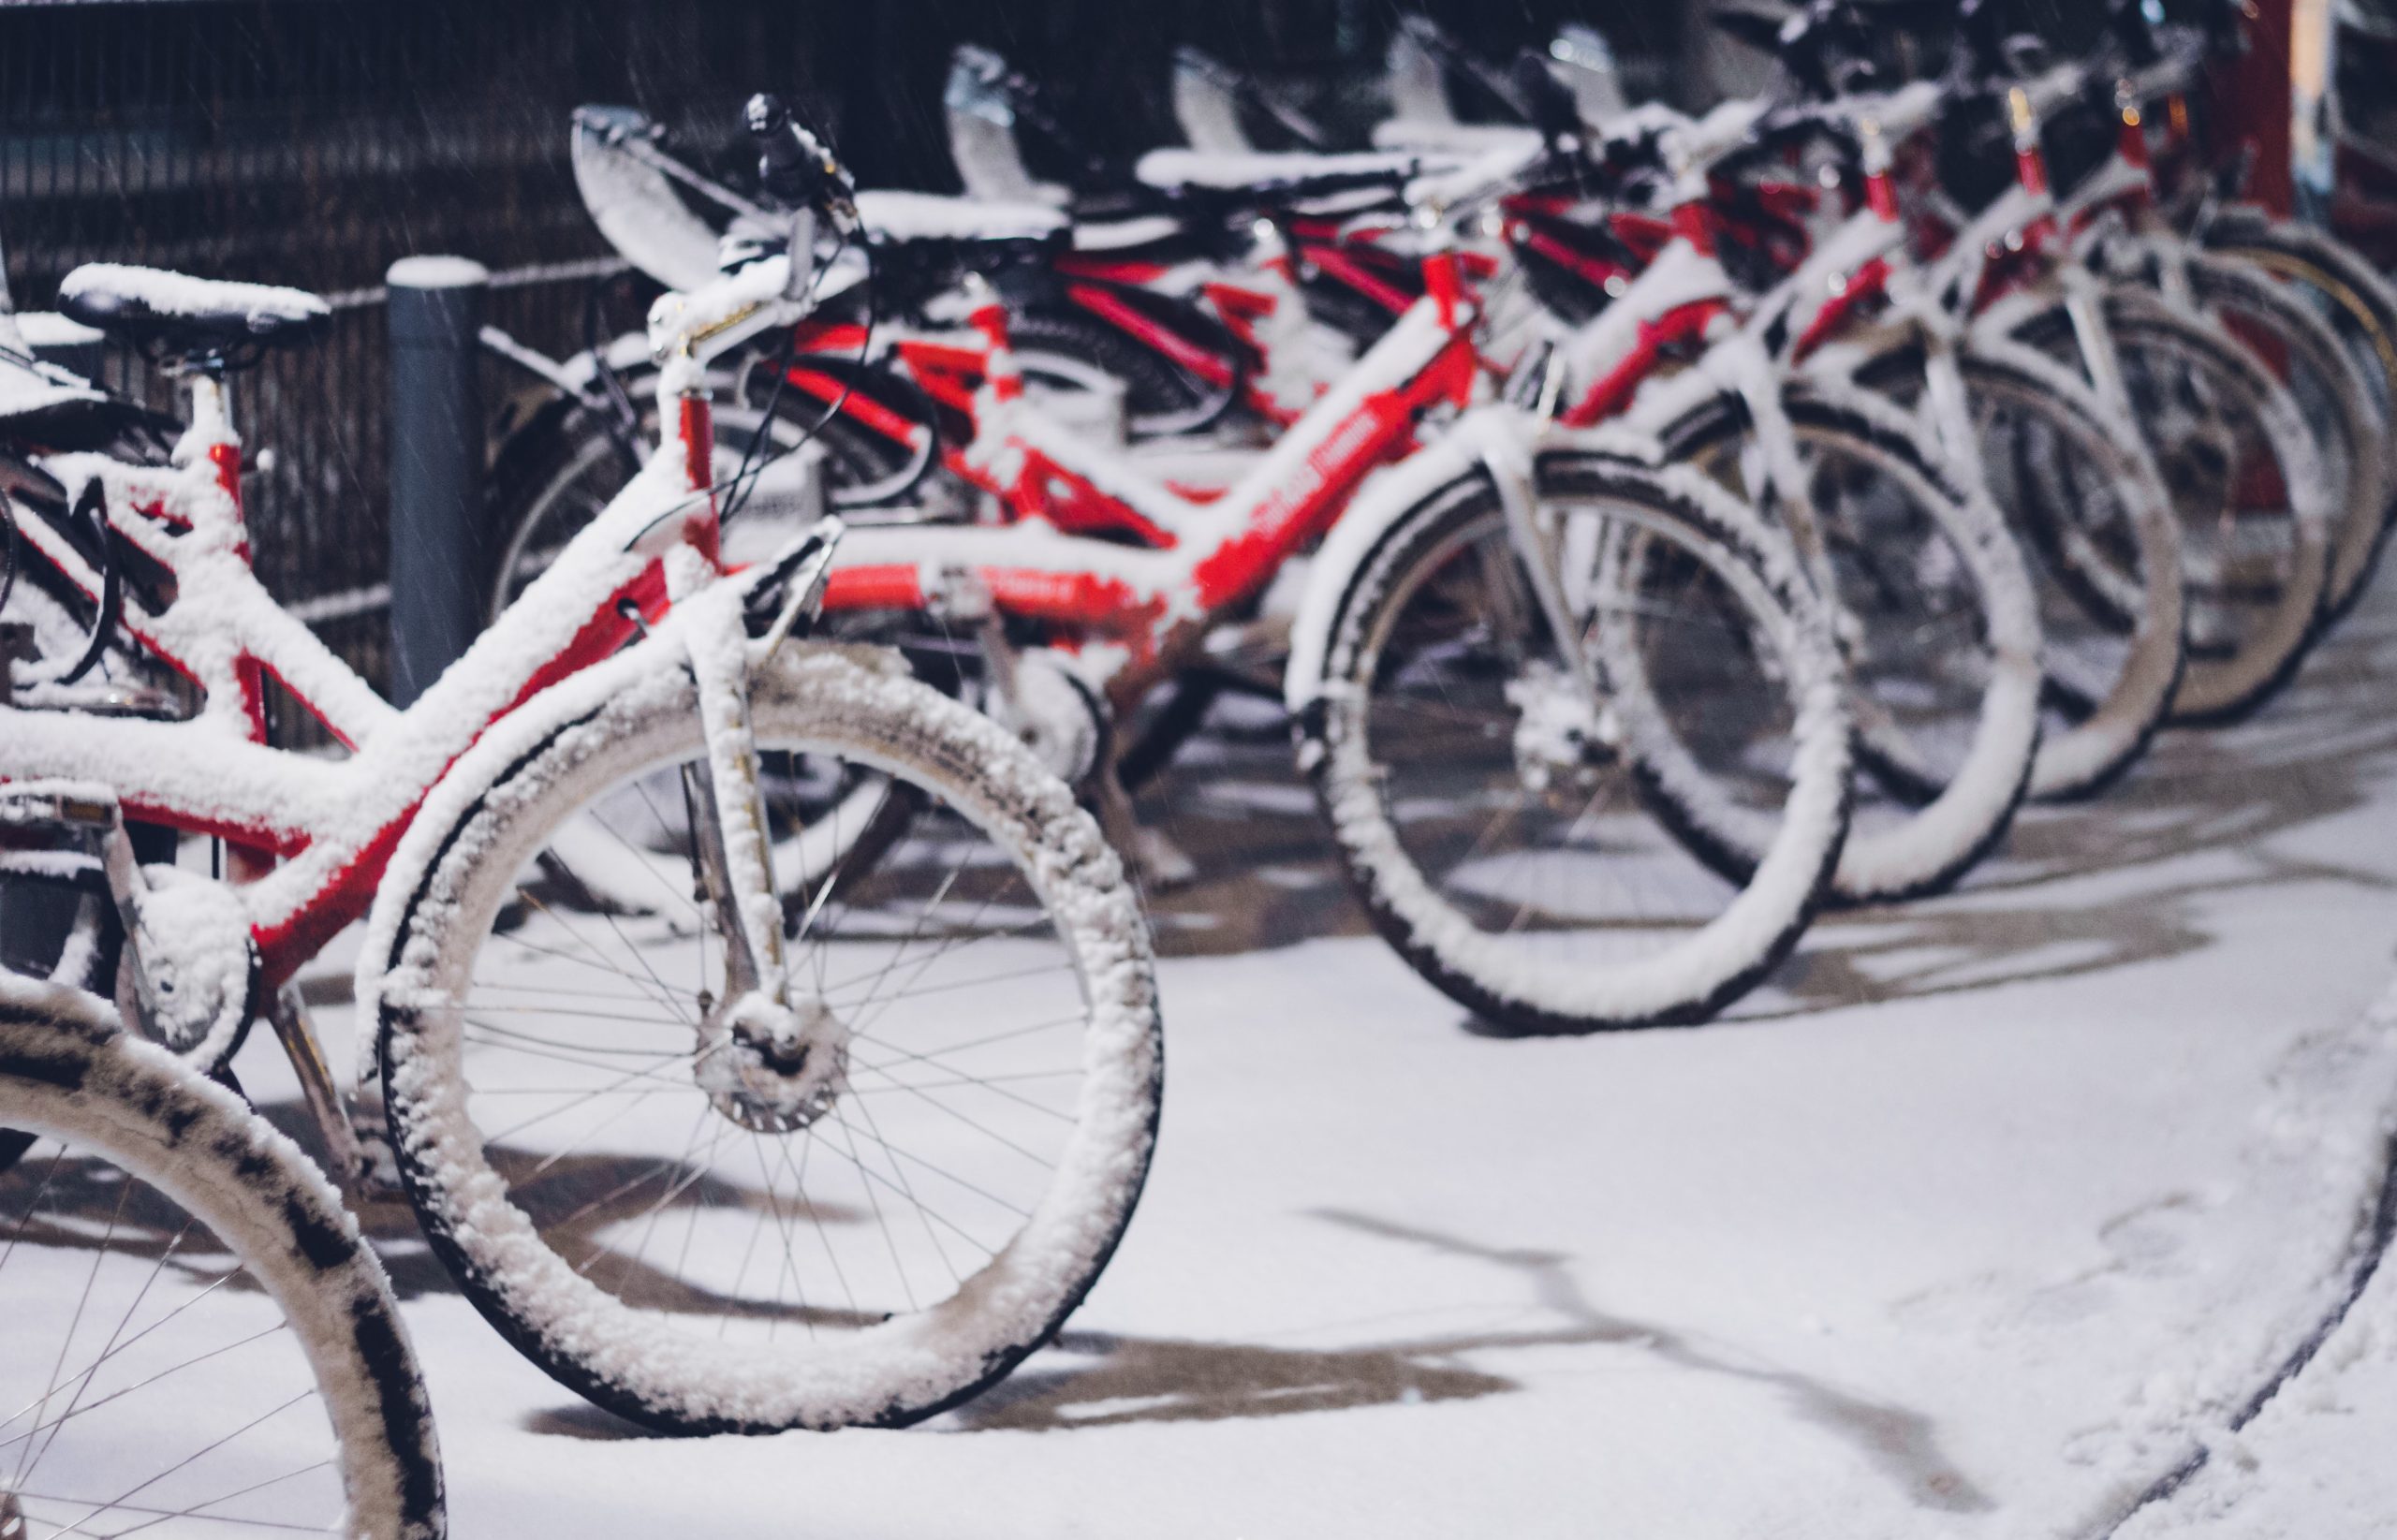 Bikes lined up covered in snow